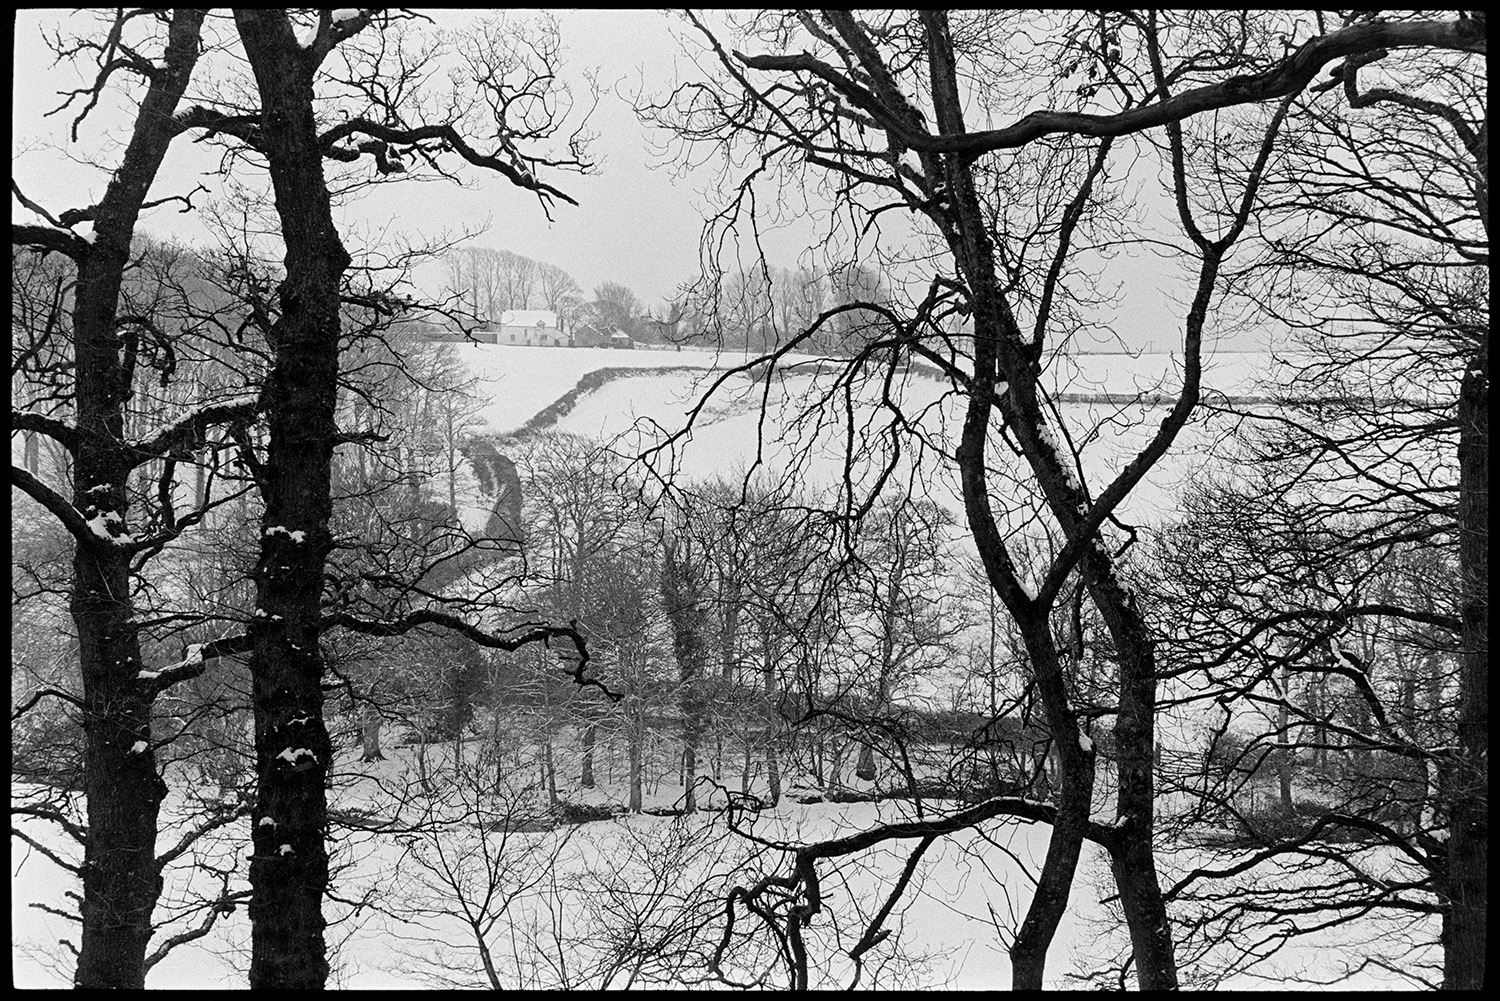 Man skiing on snow beside wood. 
[Snow covered fields and trees at Parsonage, Iddesleigh, viewed through tree branches in the foreground.]